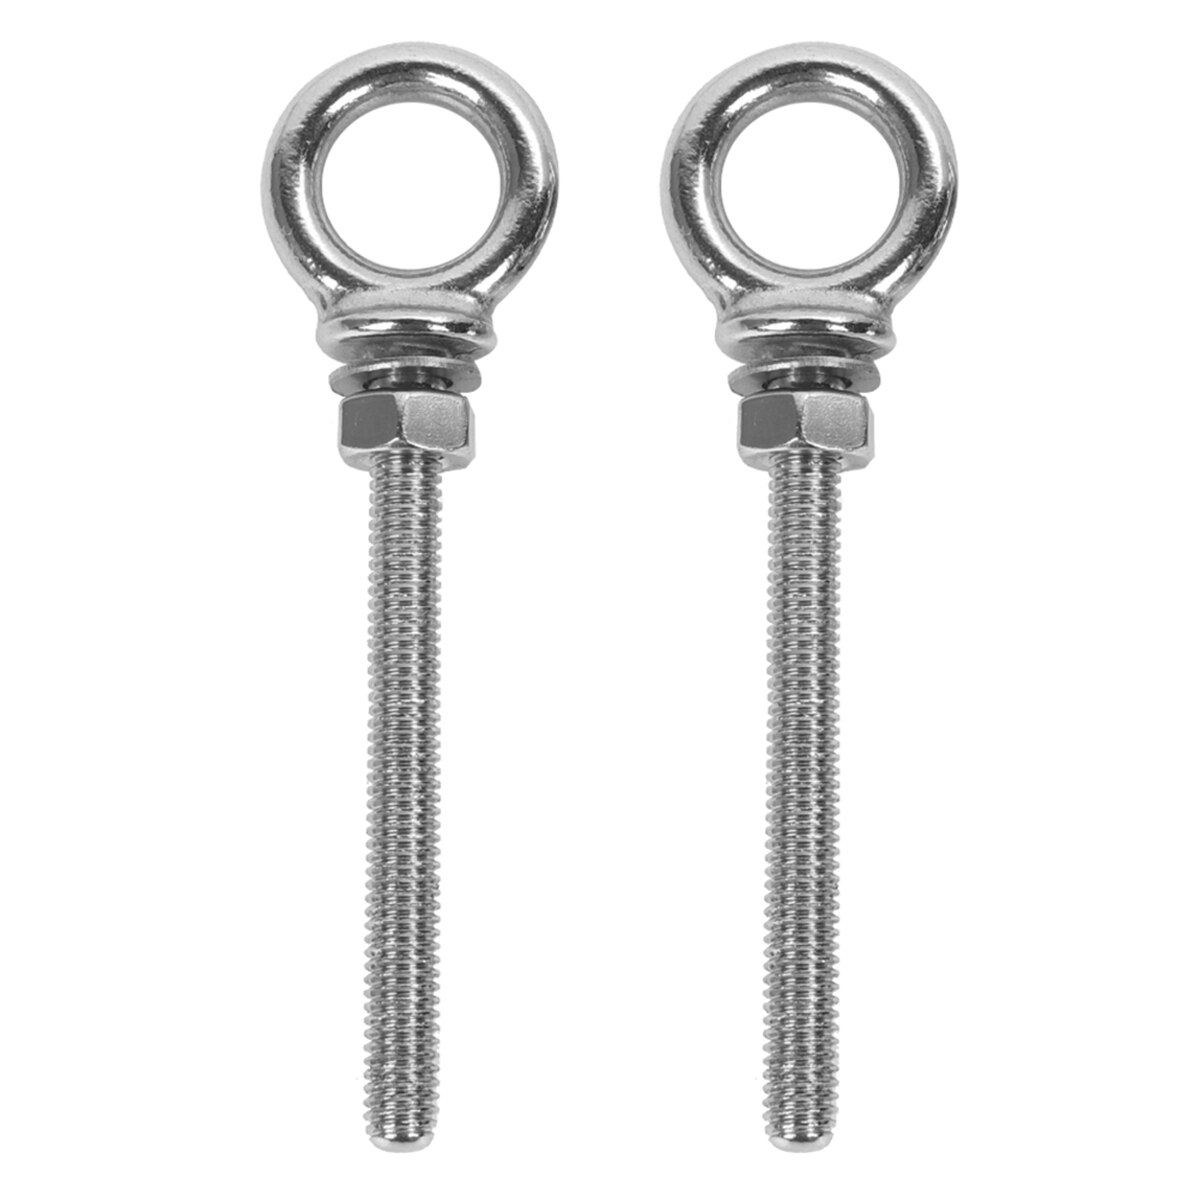 Durable Stainless Steel Lifting Eye Bolts with Nuts Swing Eyebolts Ring Hook Bolt Screw Fasterners (M10*100/M8*80/M6*60 - 316)